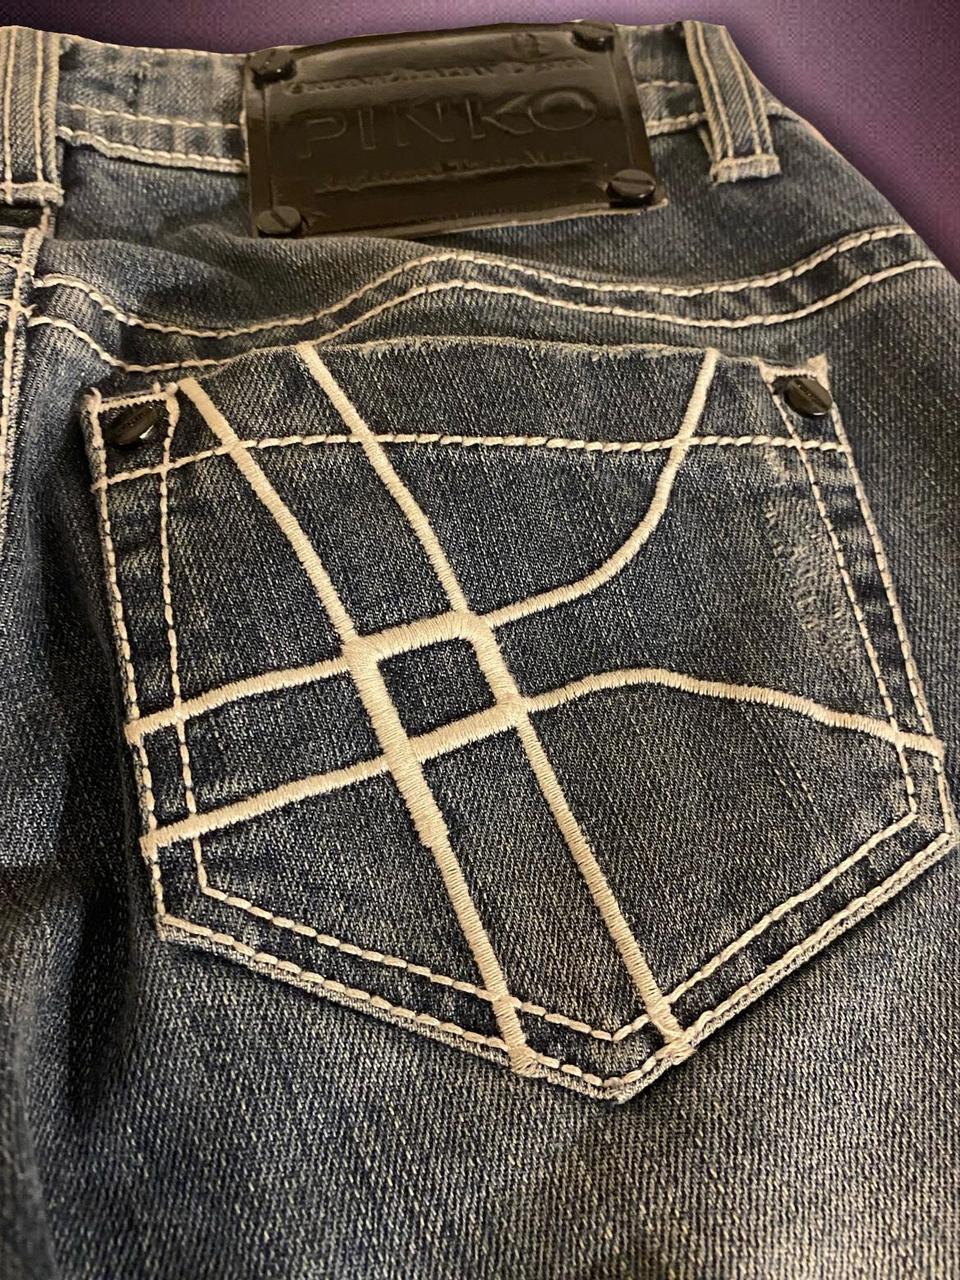 pinko low rise bootcut/flared jeans with a cute... - Depop